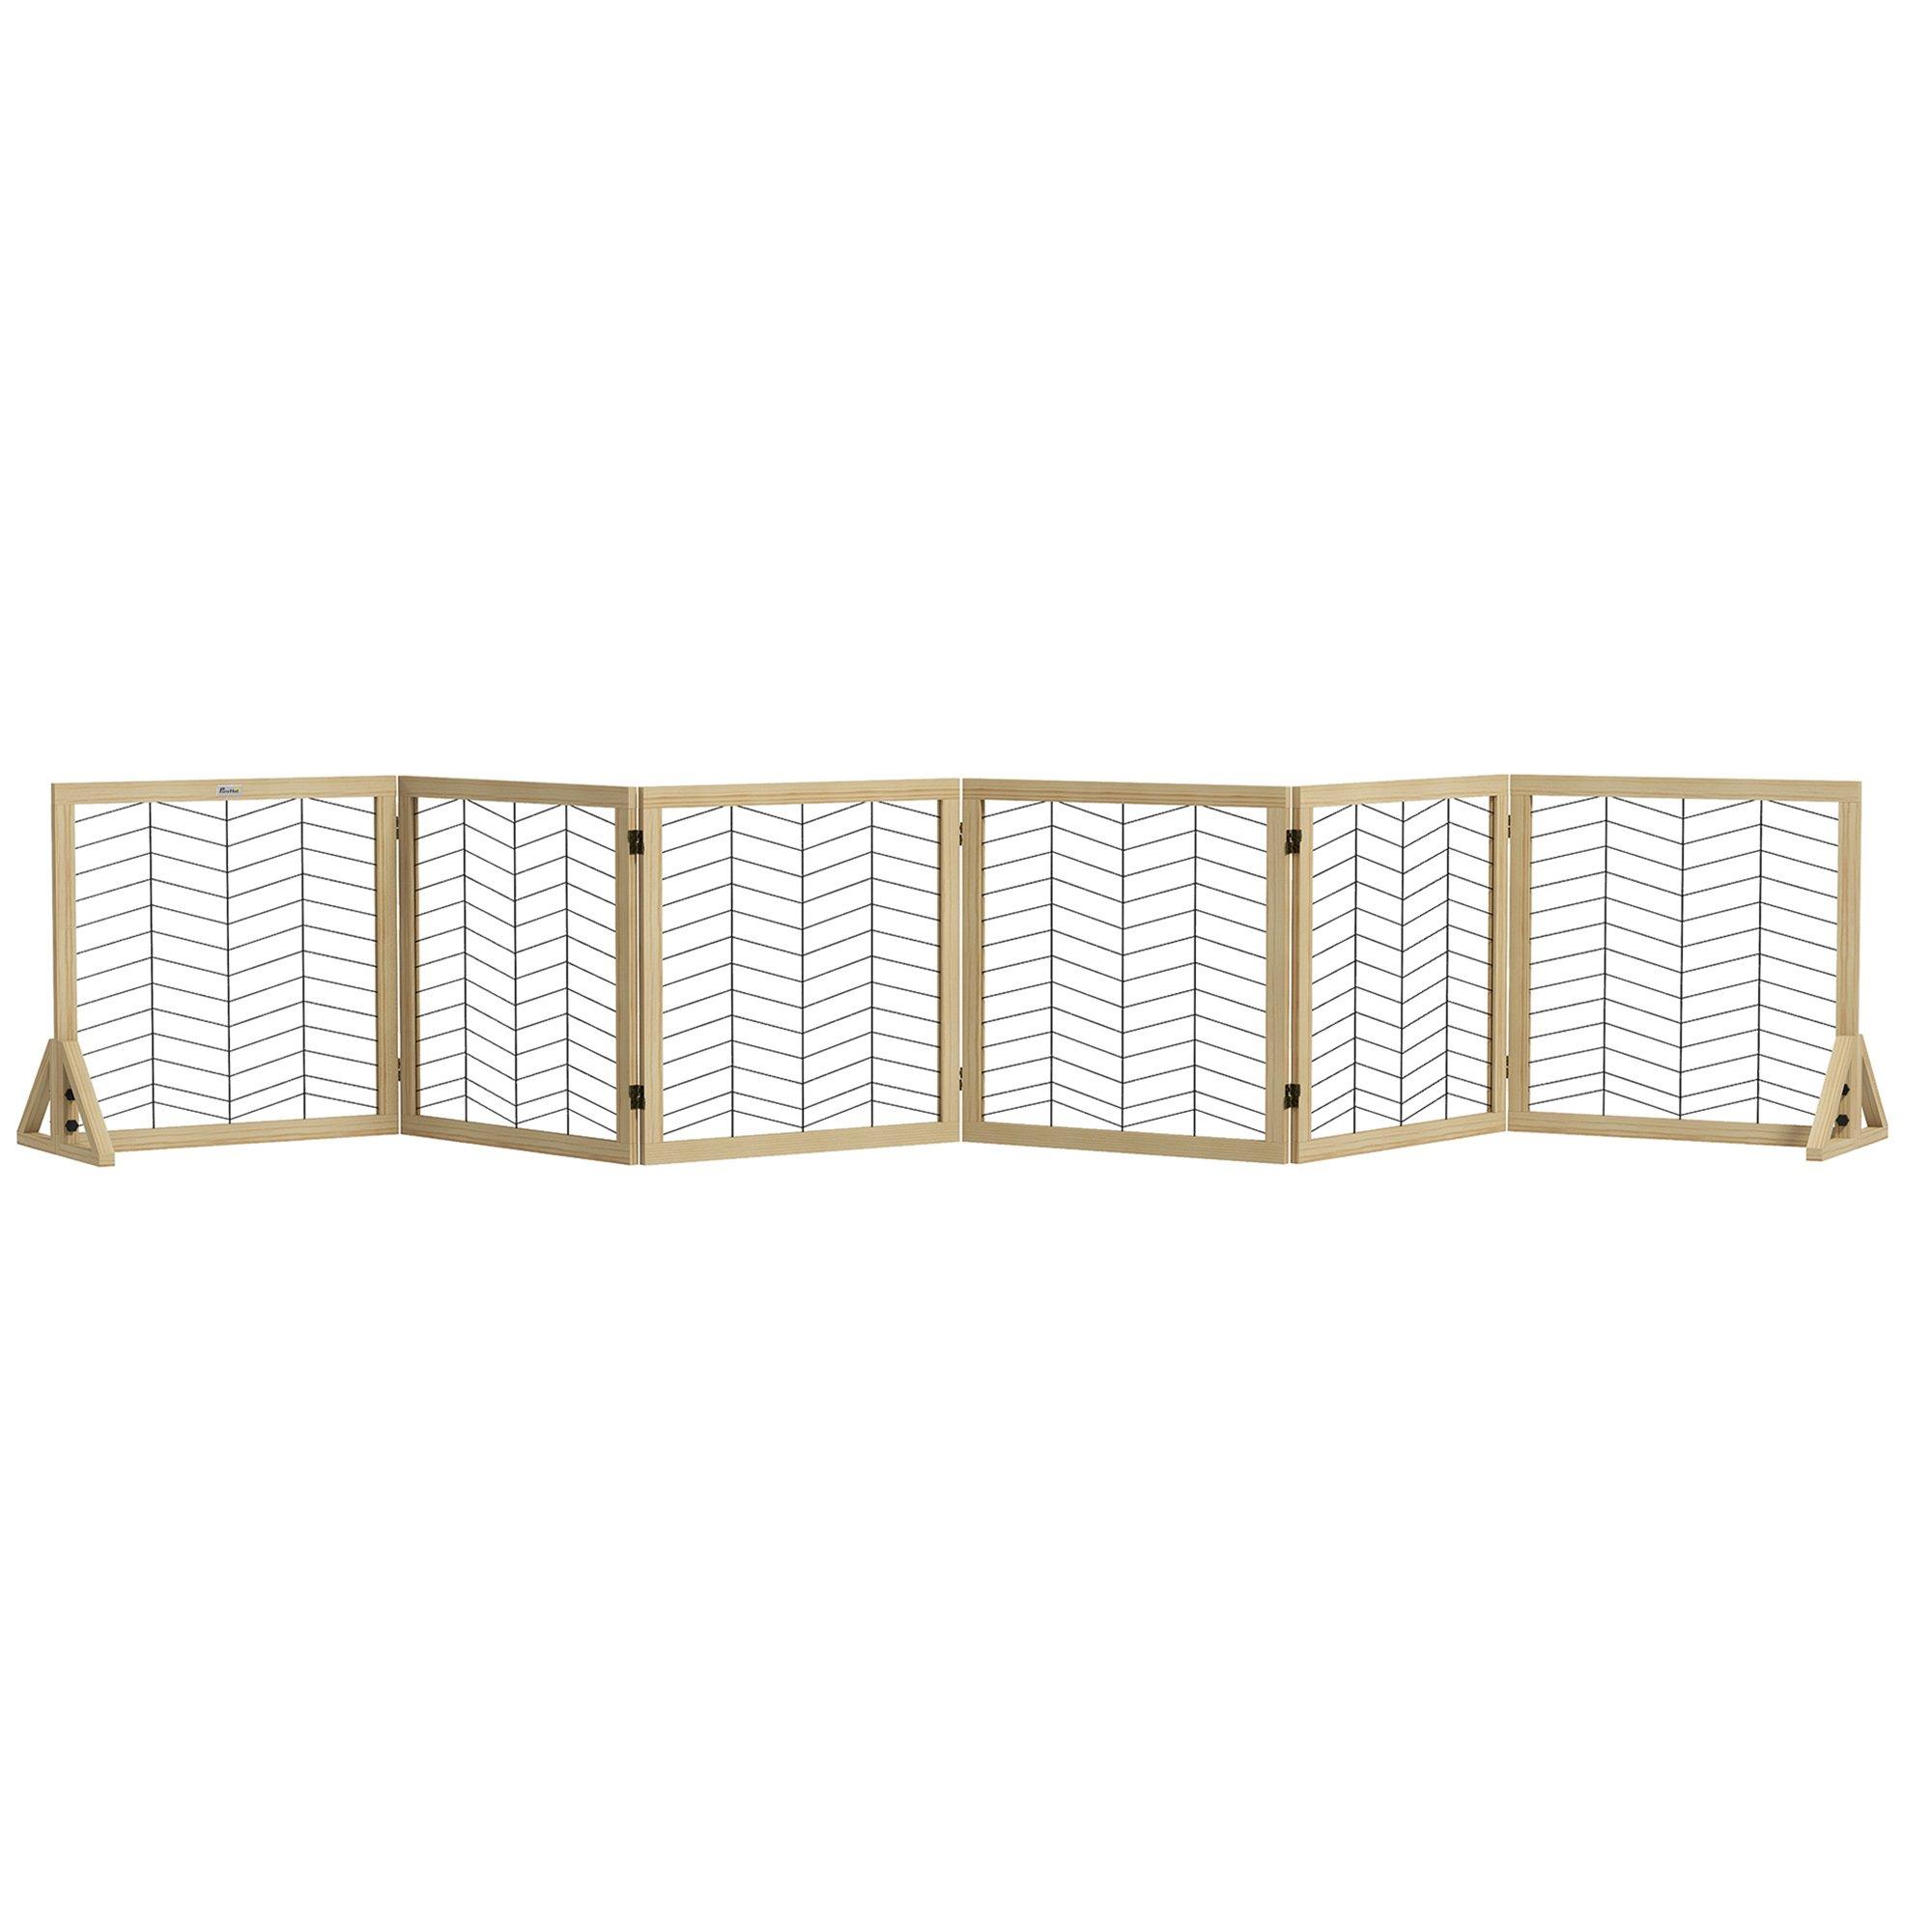 6 Panels Foldable Dog Barrier for House, Doorway, Stairs